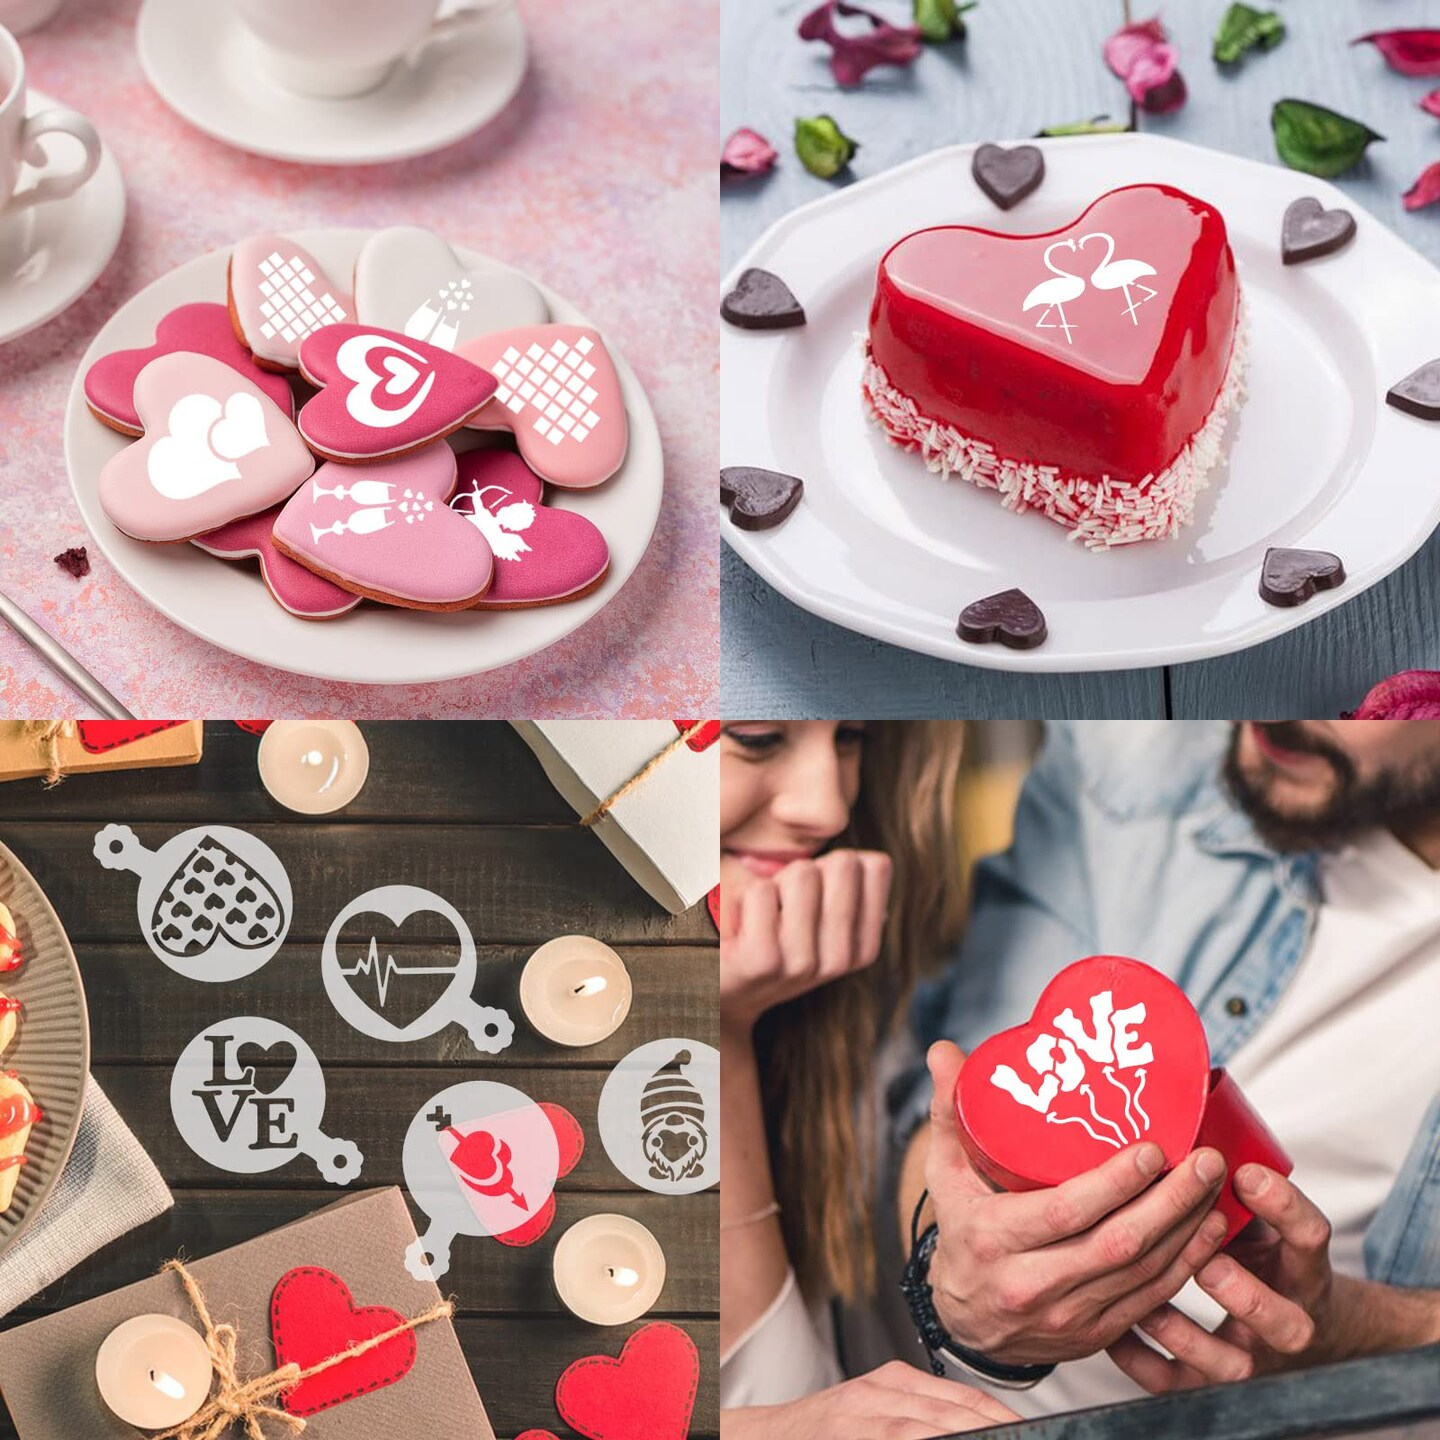 JULBEAR Valentine&#x27;s Day Cookie Stencils, 36 Pieces Reusable Cookie Coffee Decorating Stencils Templates Mold Tools for Cookies Baking Painting Dessert Coffee Decoration DIY Valentines Party Decor